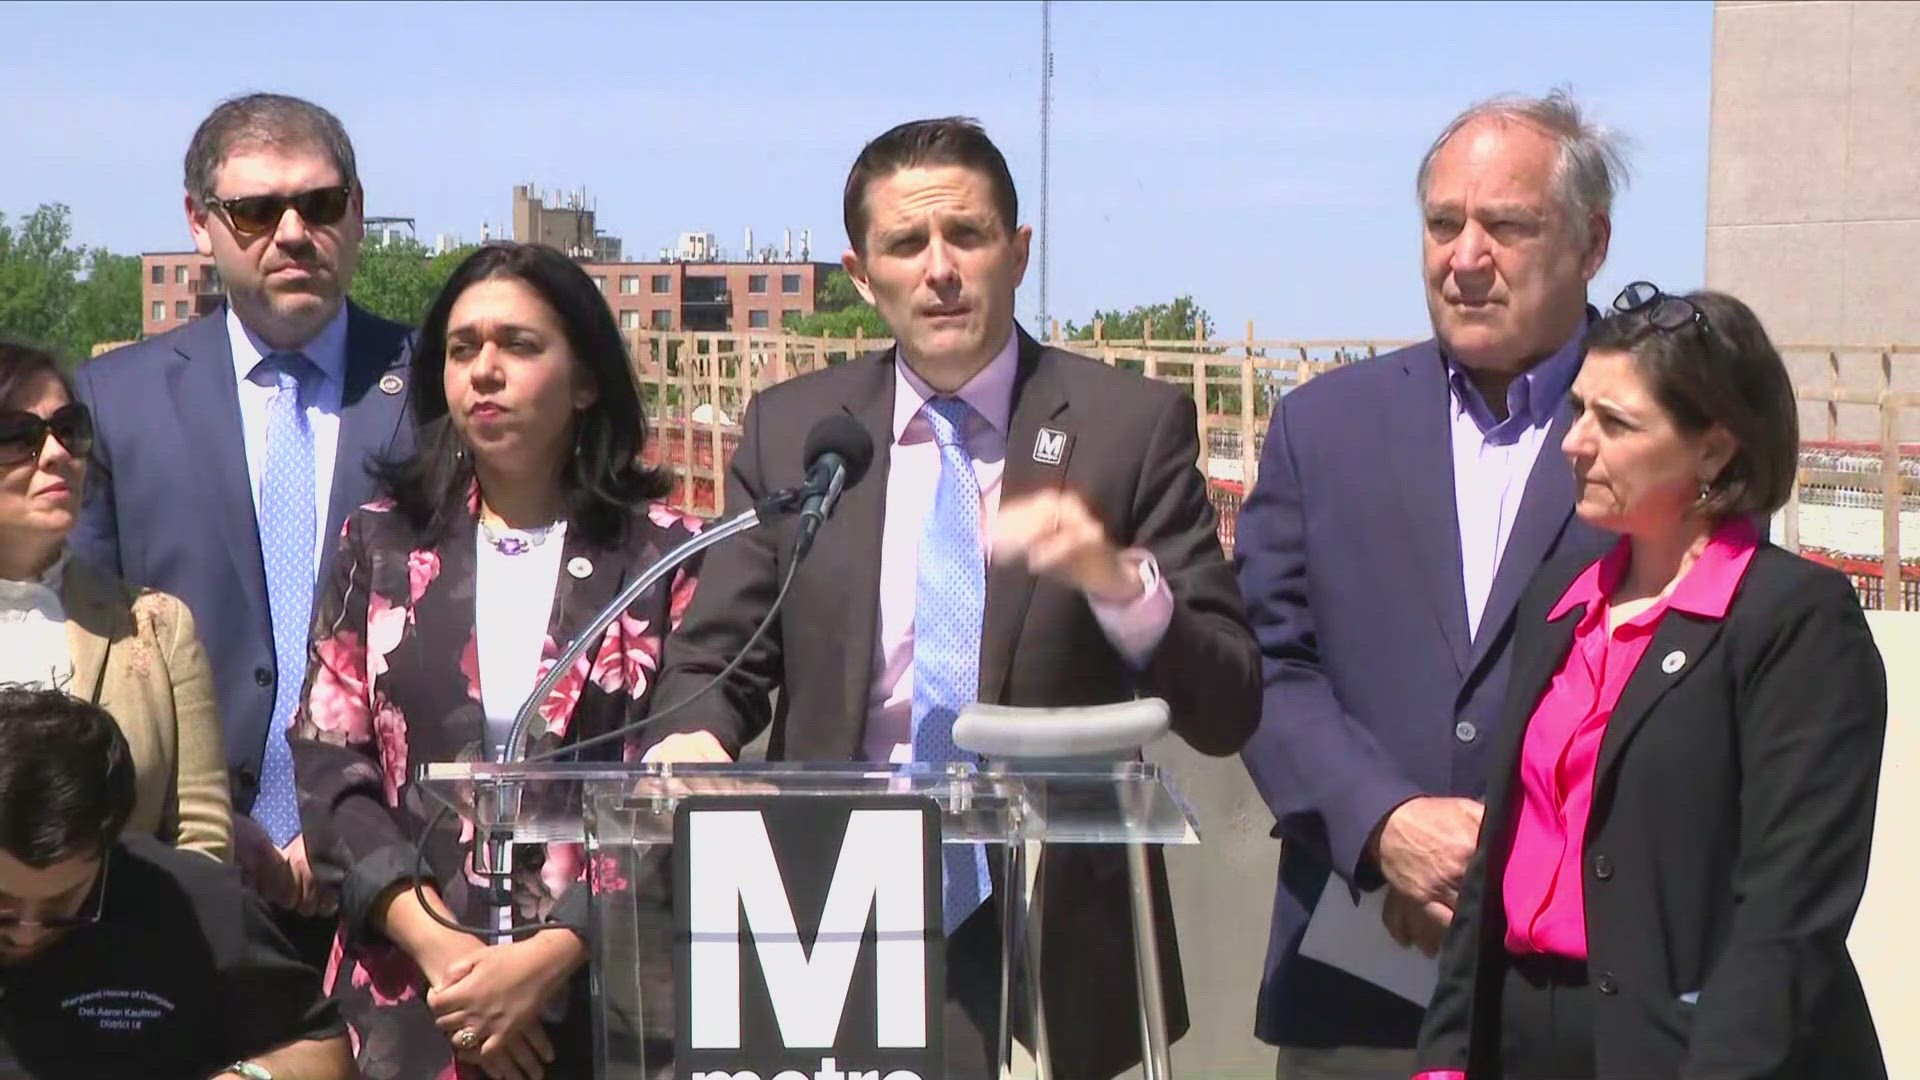 Metro transit leaders detailed their plans for an upcoming long-term Red Line closure in a press conference Tuesday.